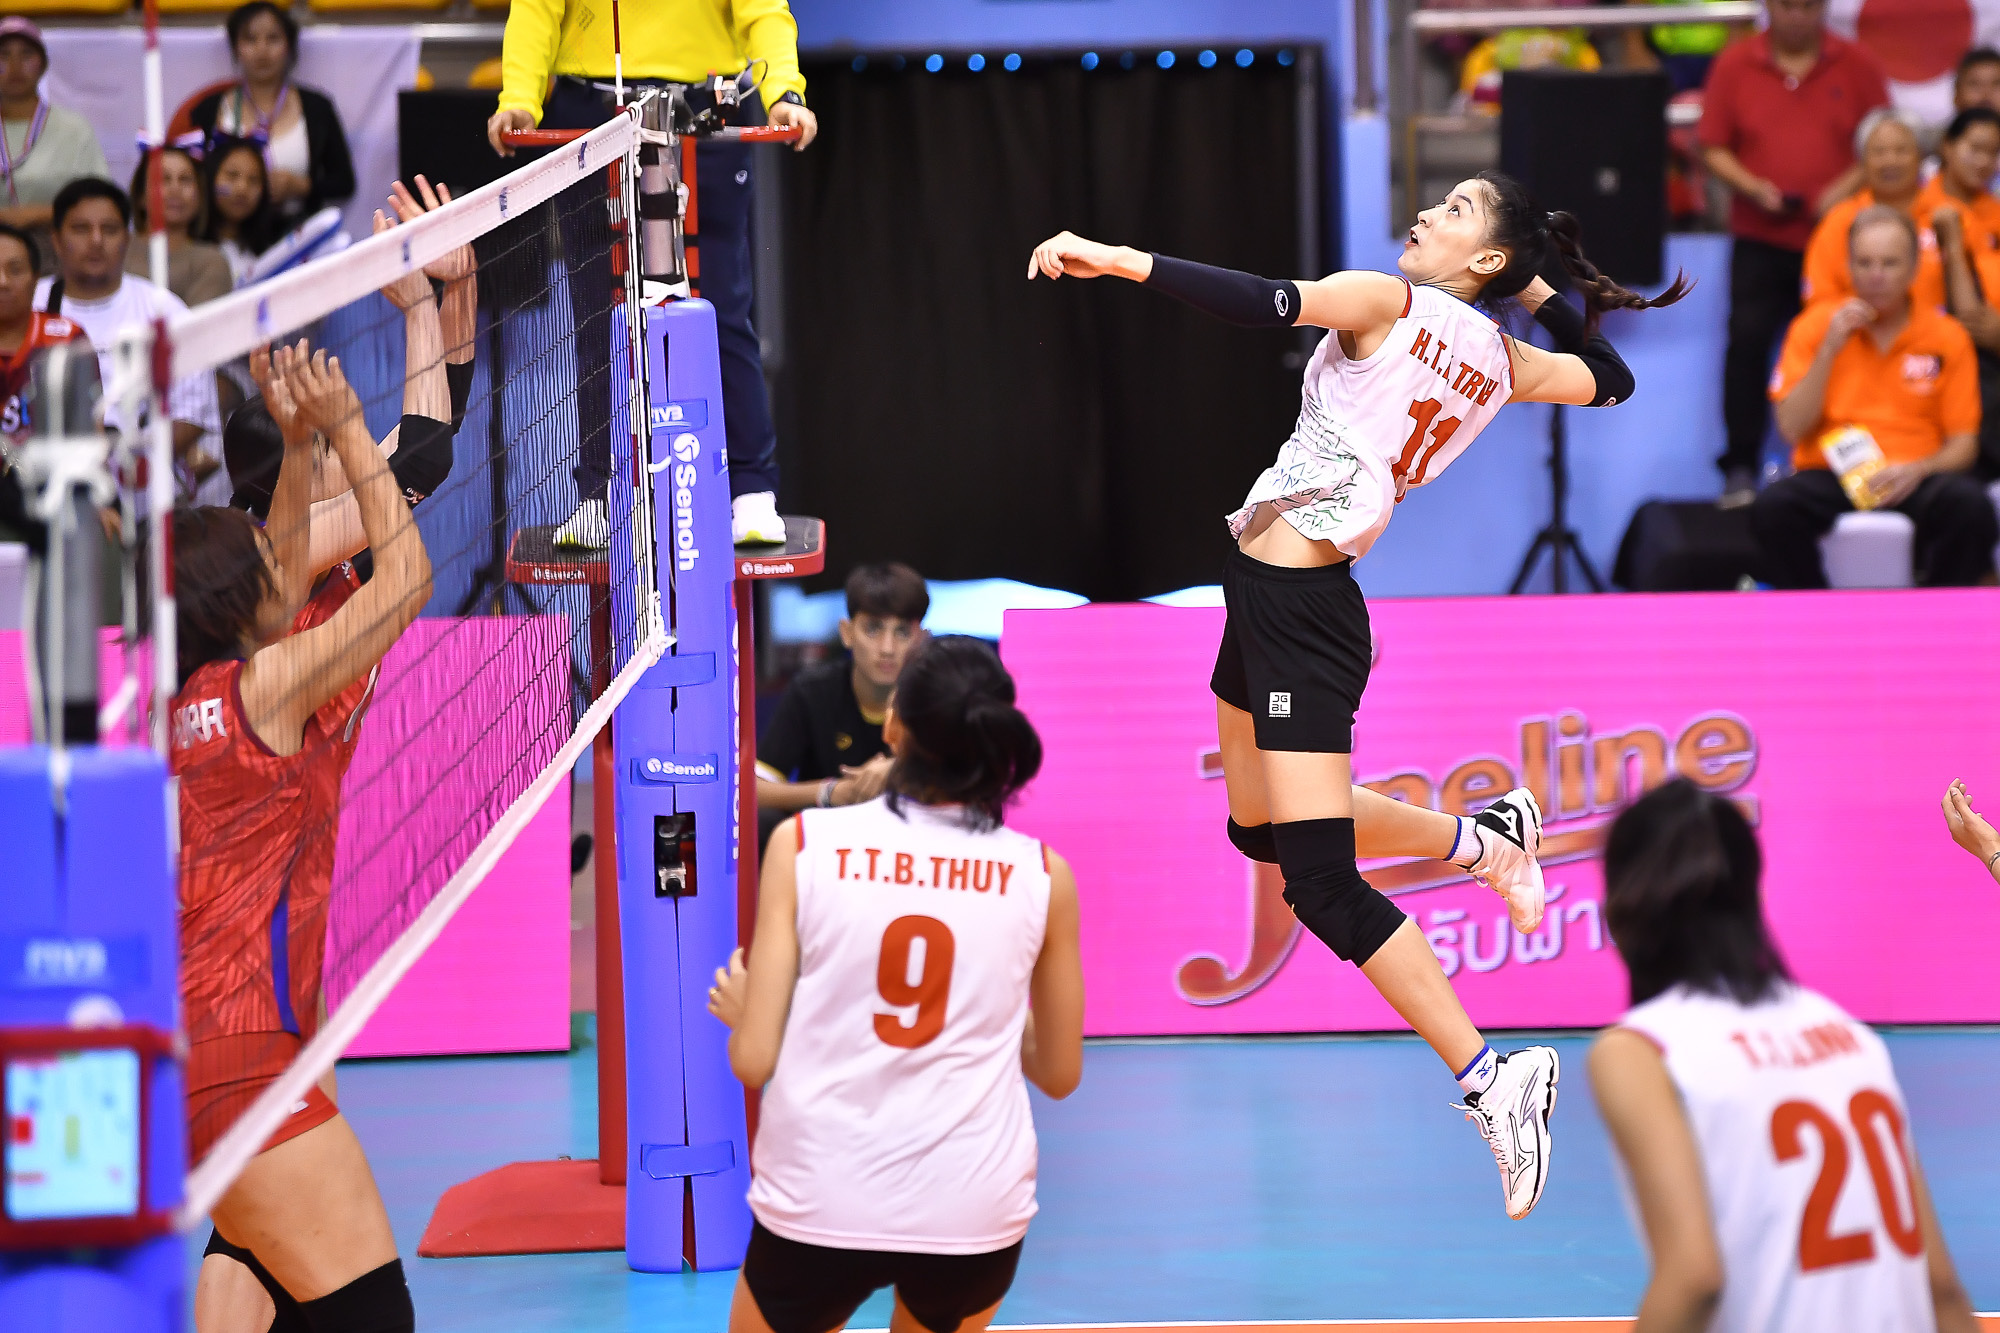 Vietnam wraps up Asian volleyball championship in 4th place